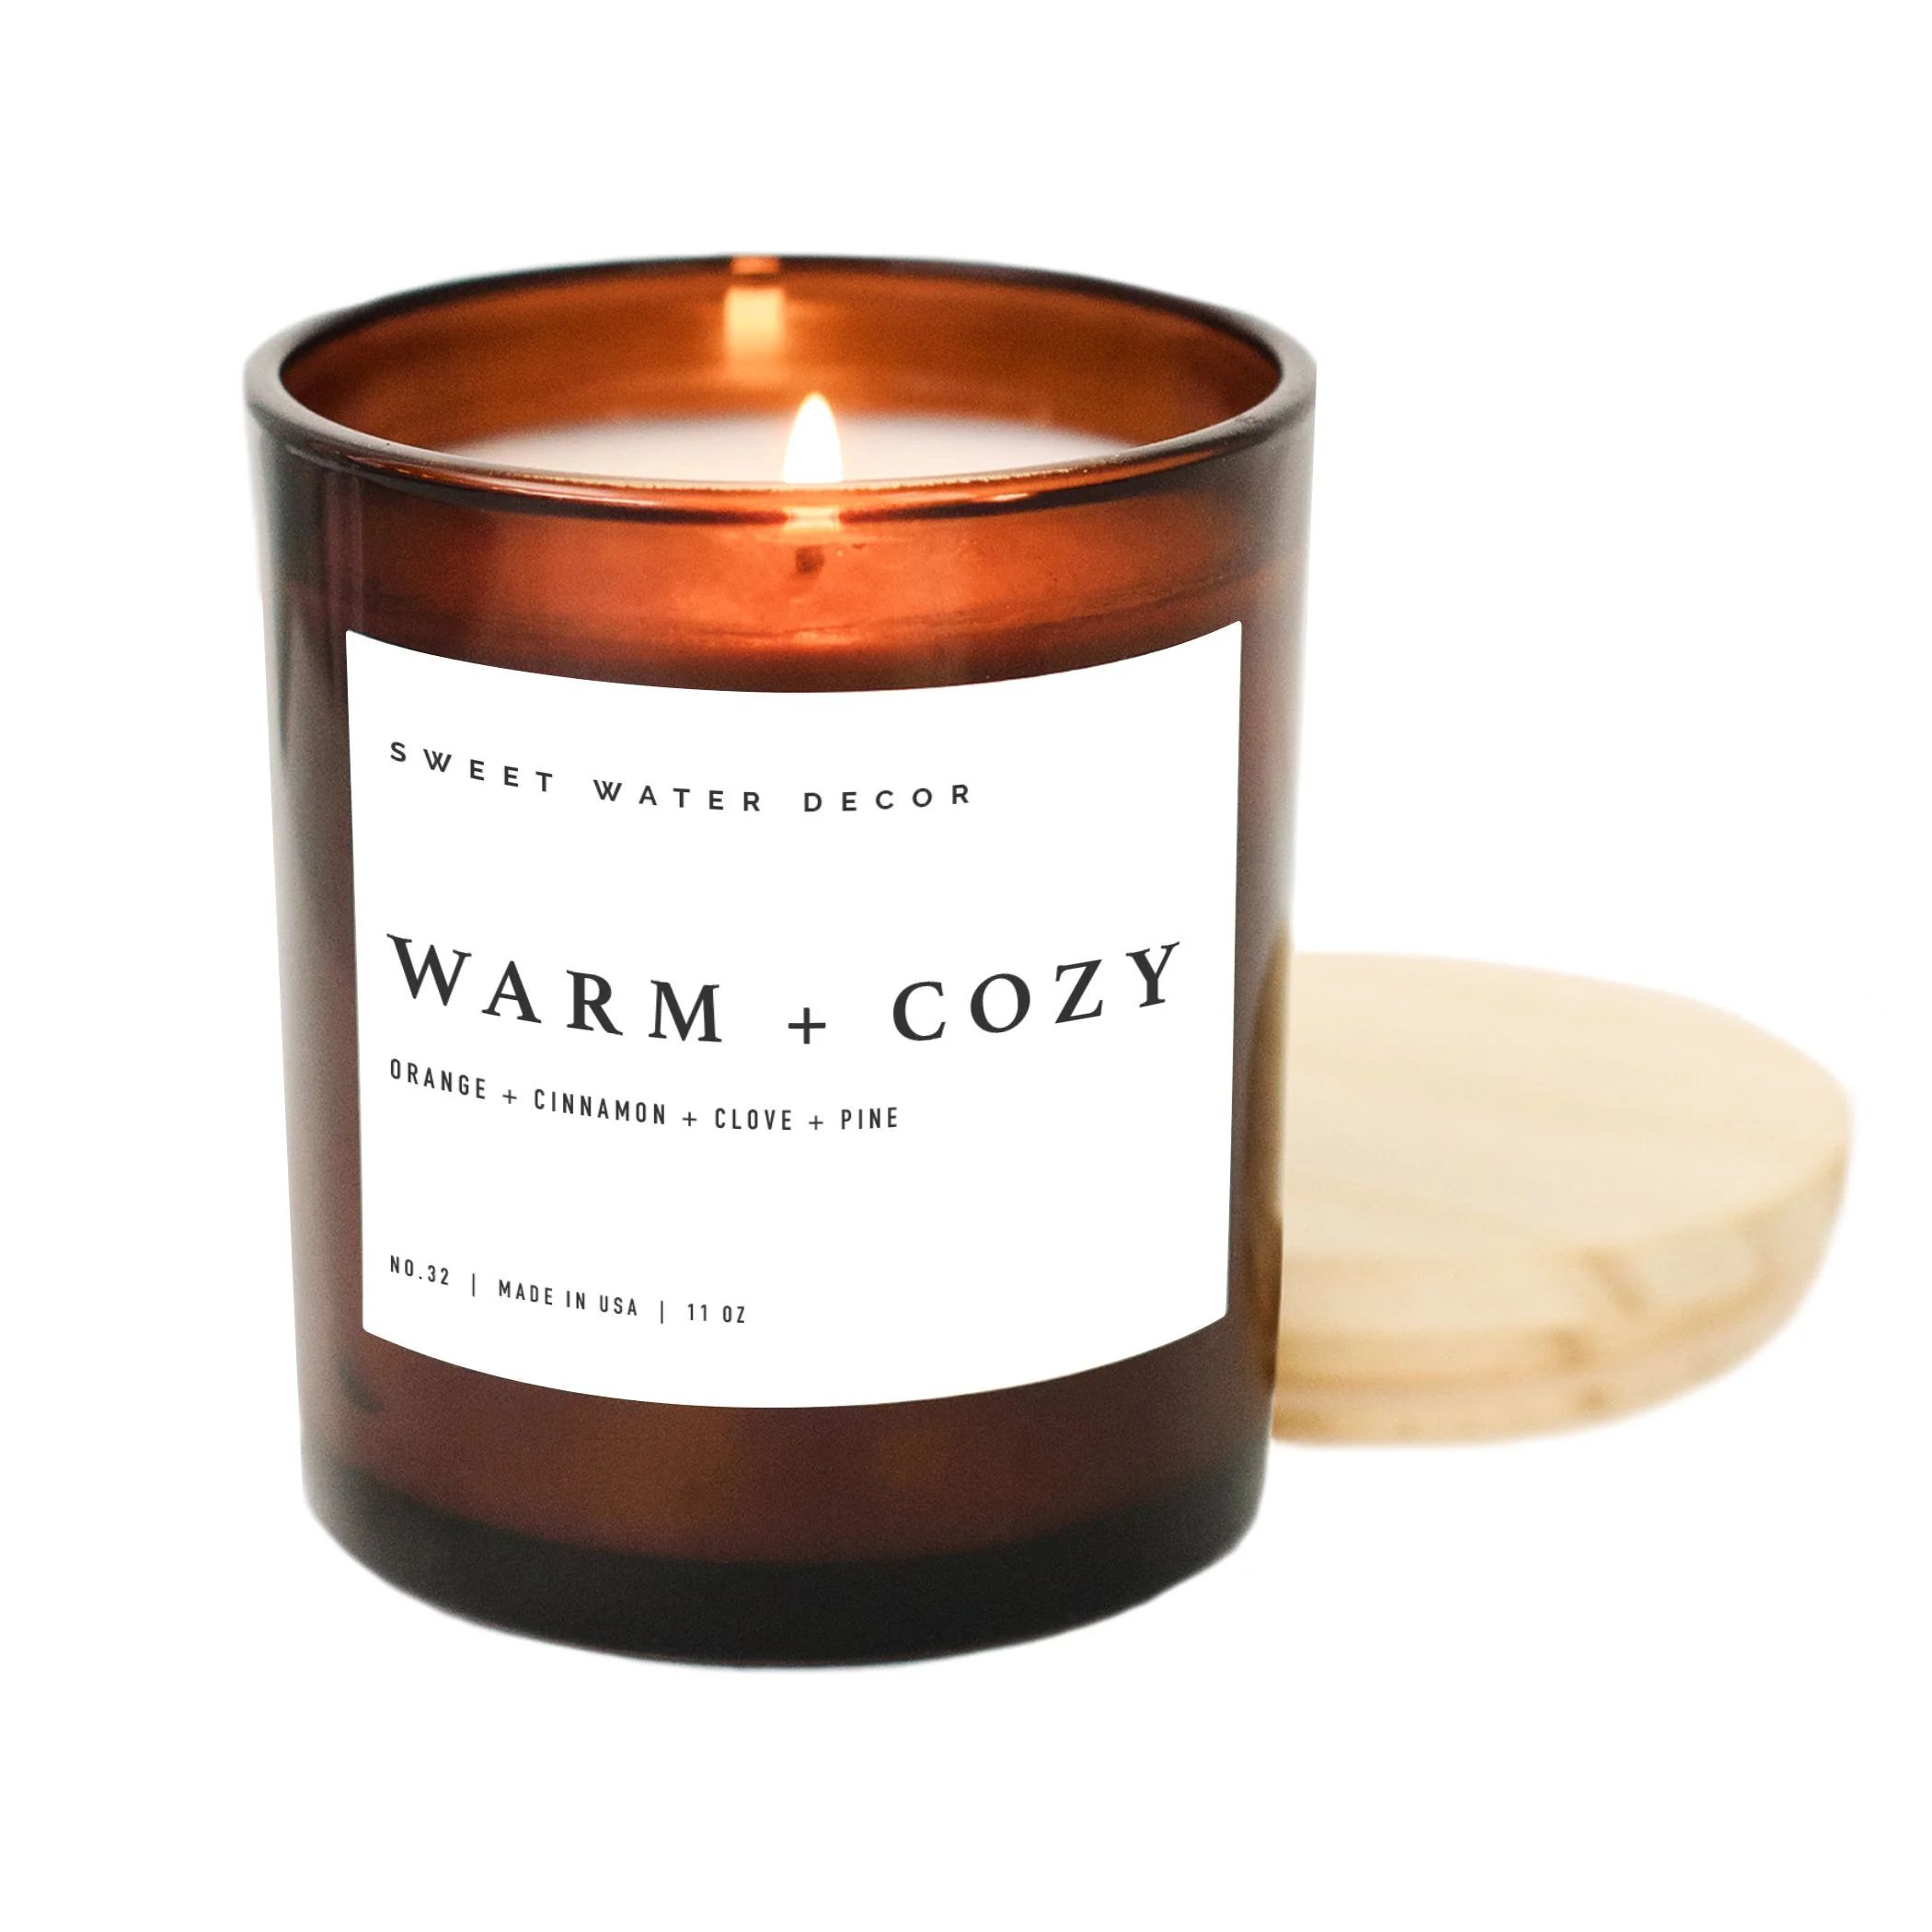 Warm and Cozy Soy Candle - Amber Jar - 11 oz | Sweet Water Decor, LLC